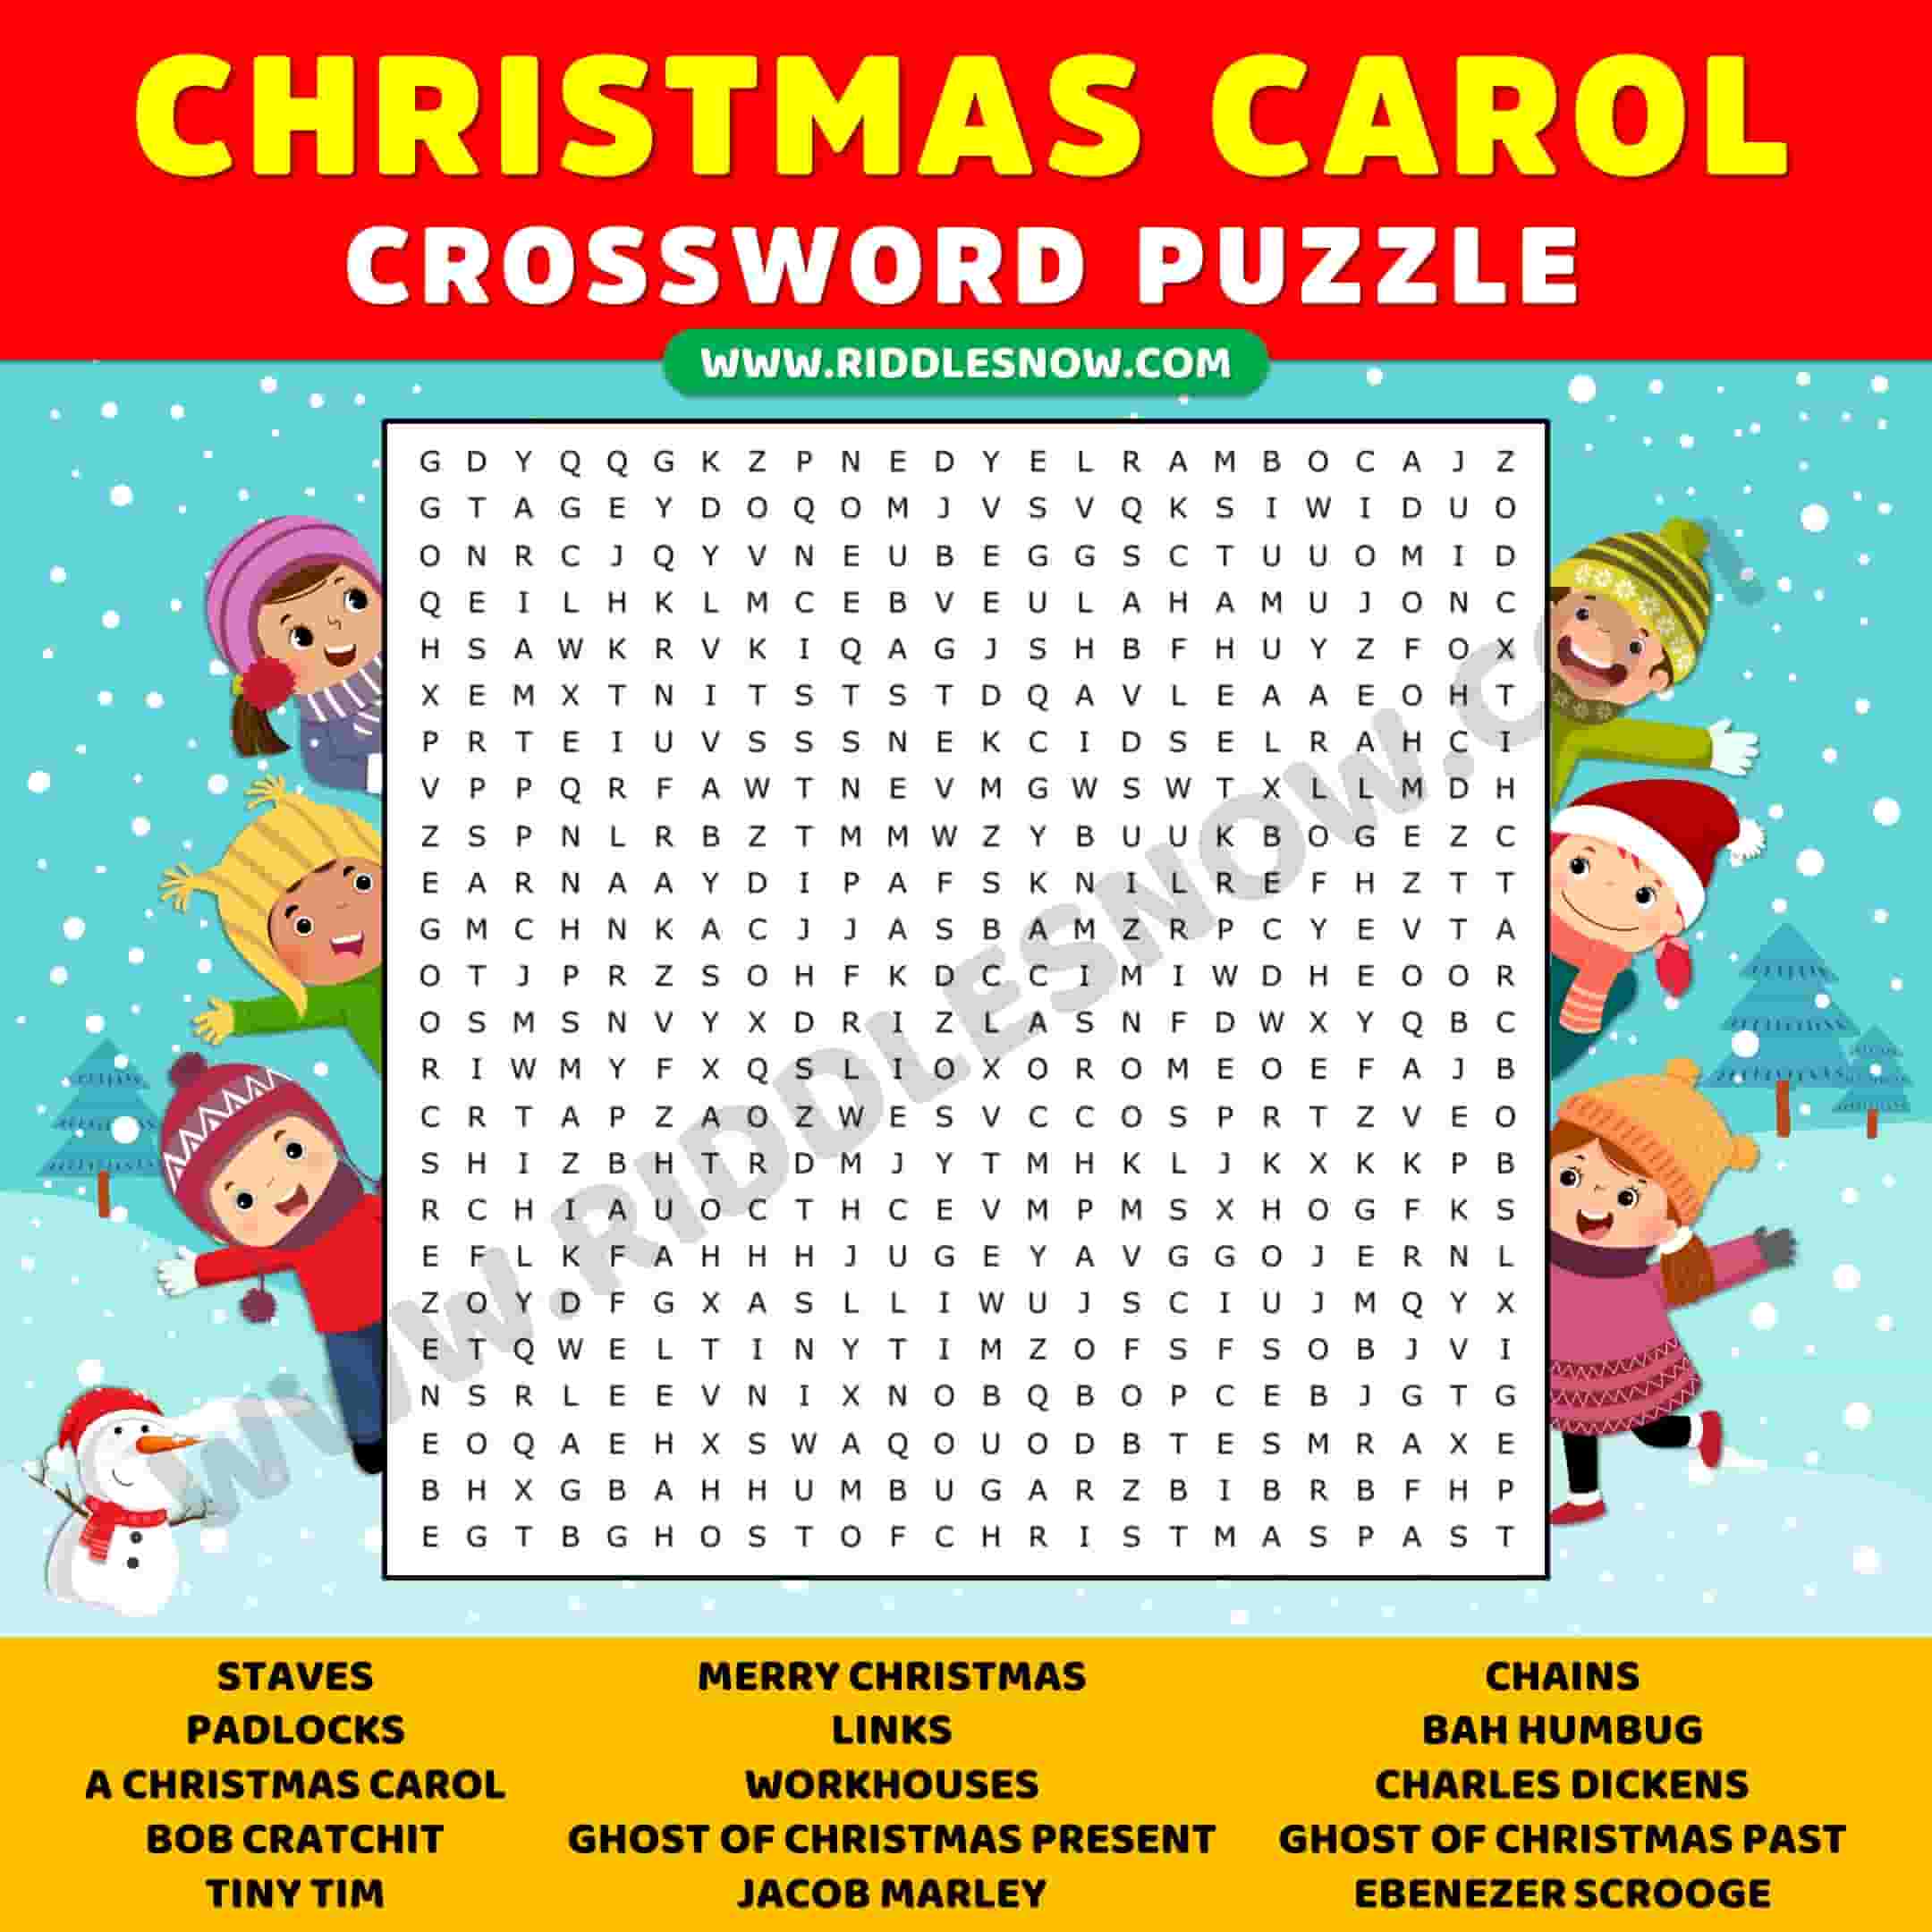 a christmas carol by charles dickens crossword puzzle